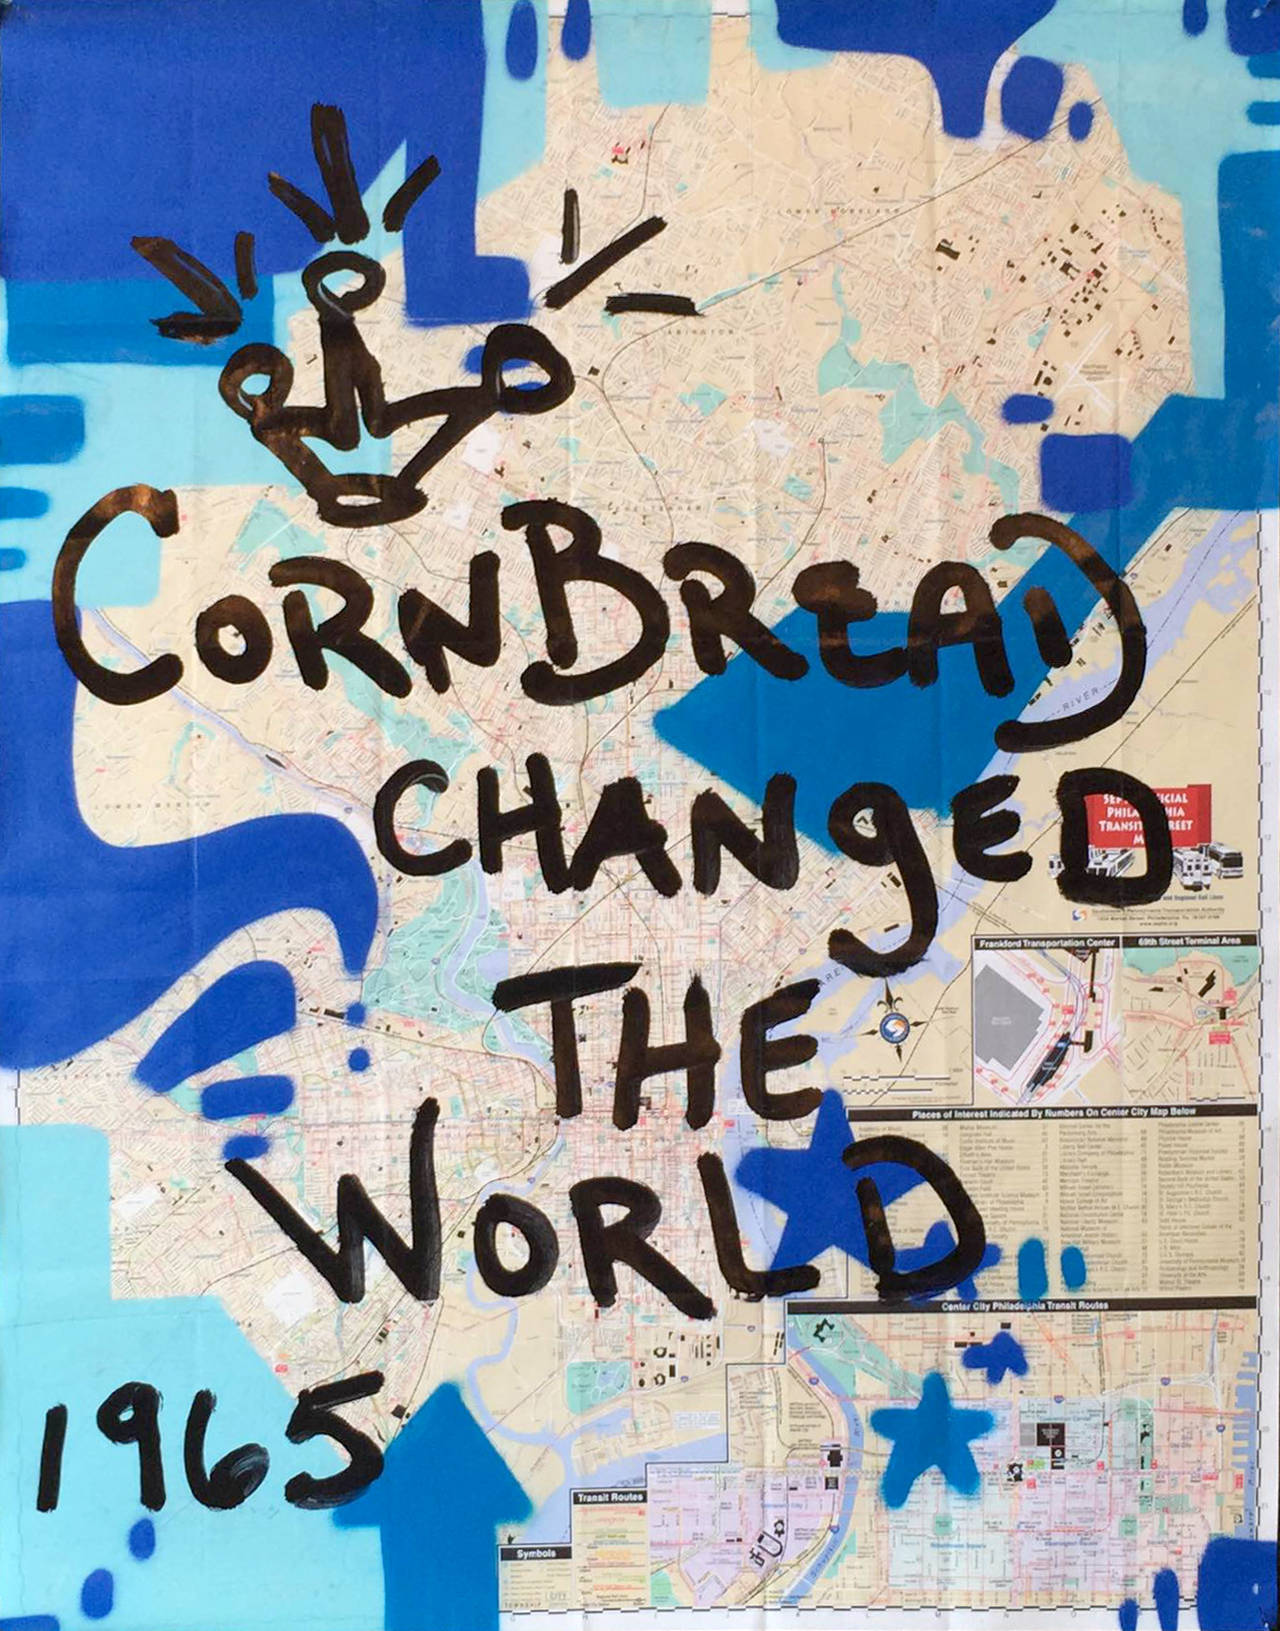 Changed The World Map - Painting by Cornbread